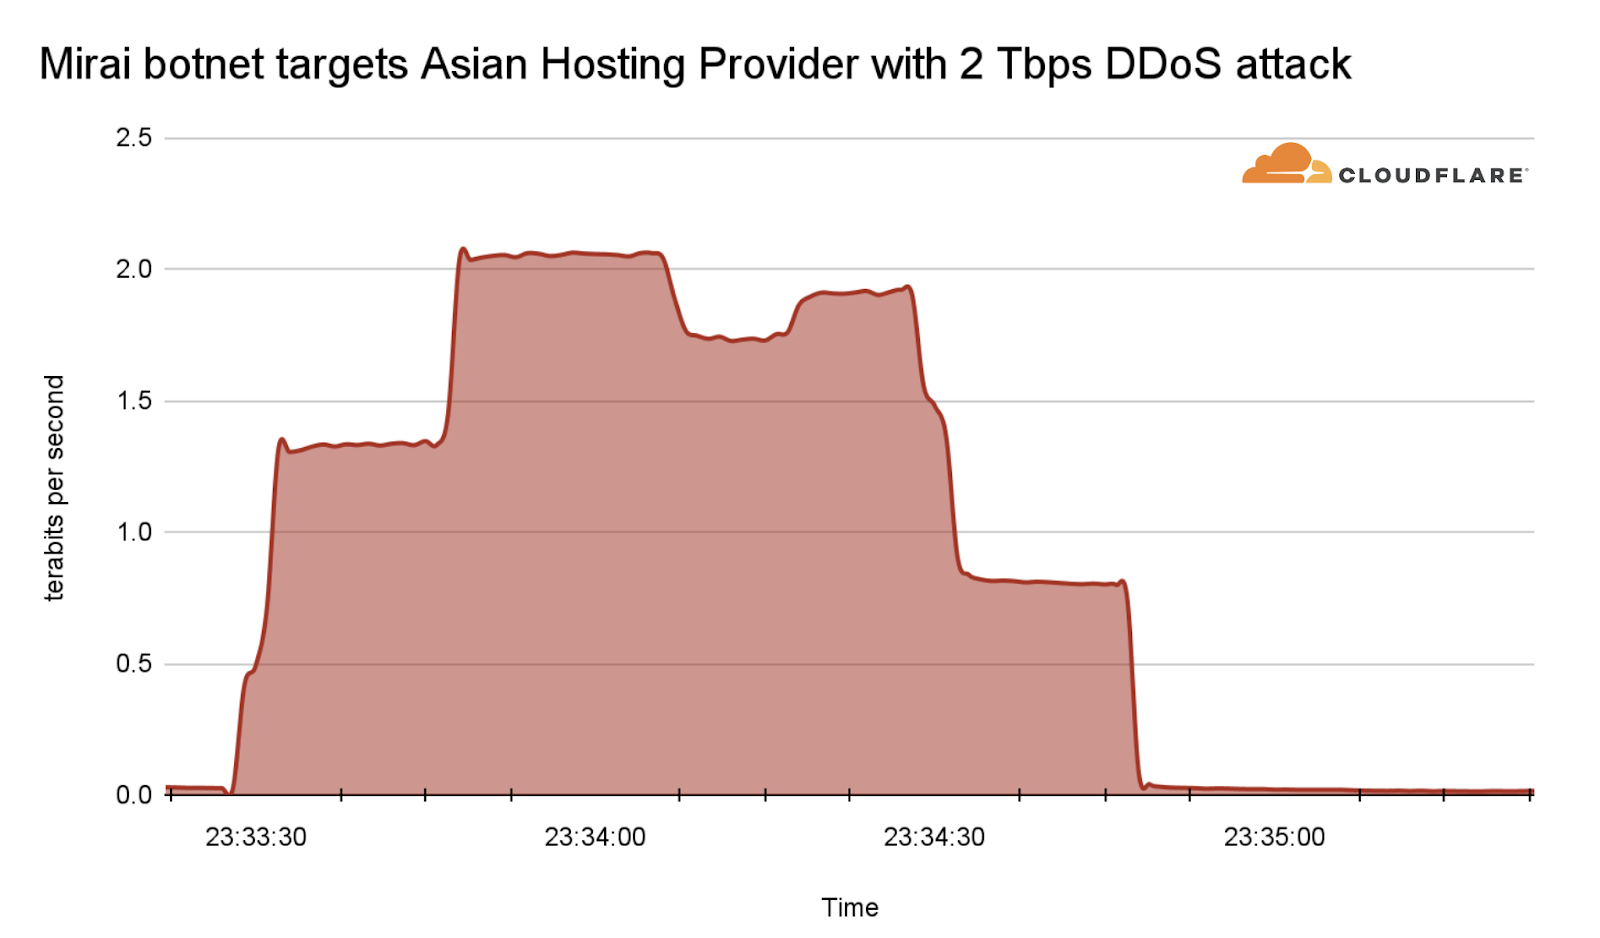 Mirai botnet targets Asian hosting provider with 2 Tbps DDoS attack